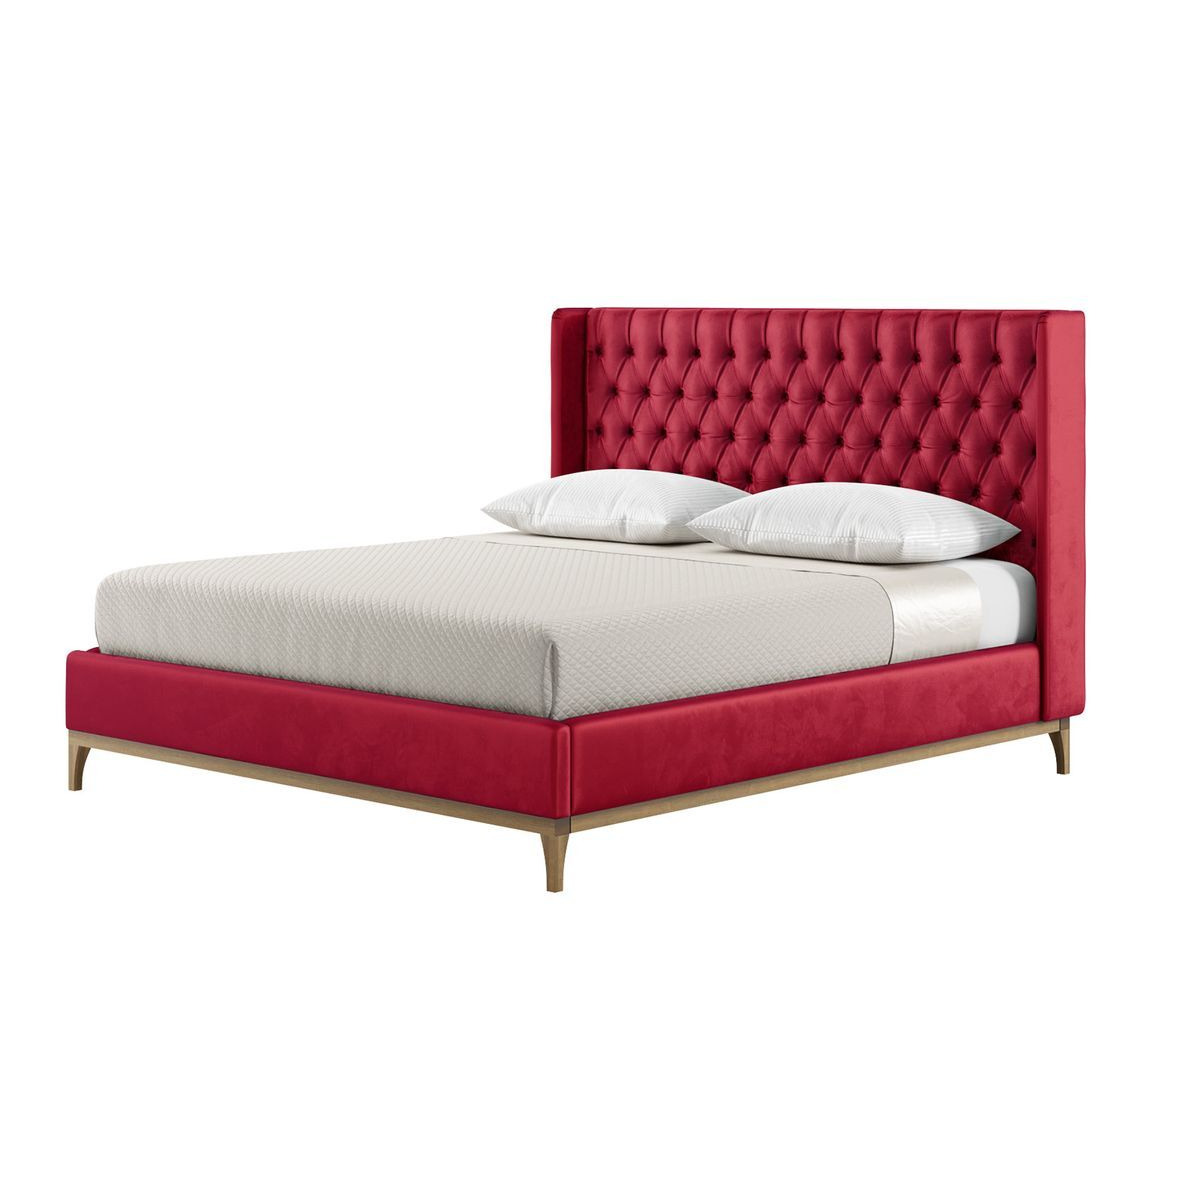 Marlon 6ft Super King Size Bed Frame with luxury deep button quilted wing headboard, dark red, Leg colour: wax black - image 1